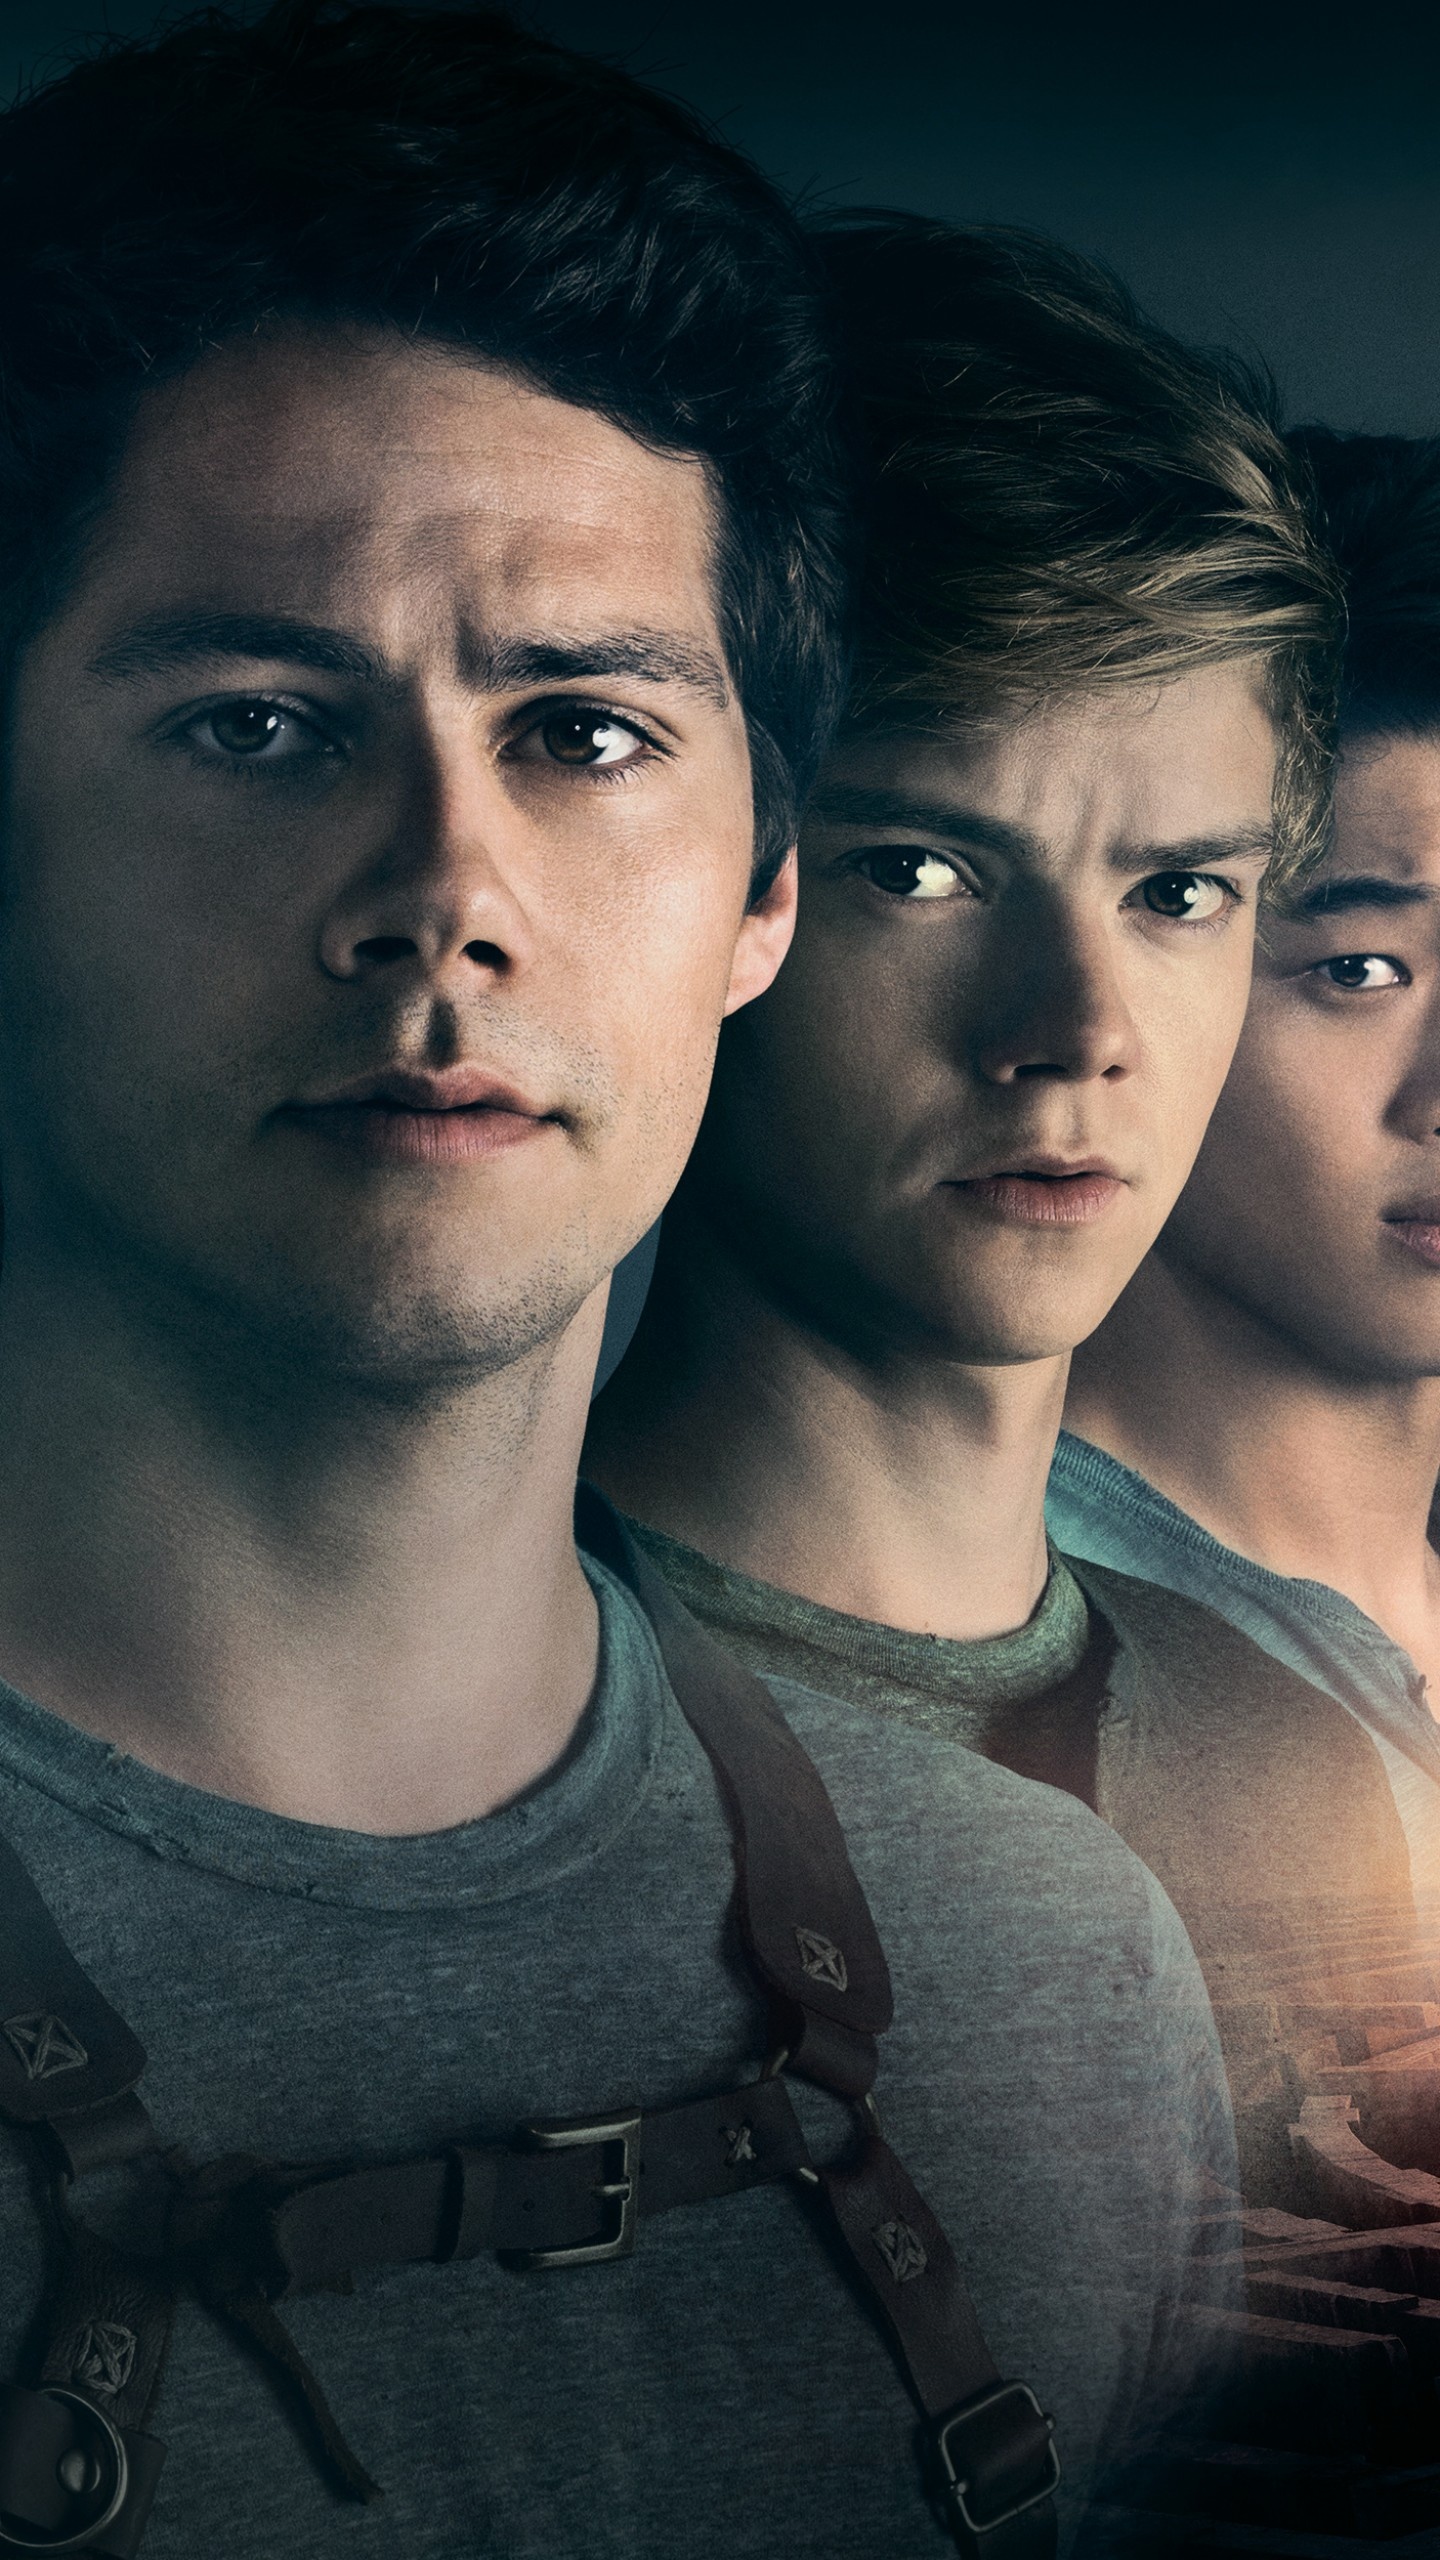 Dylan O'Brien Movies, Maze Runner series, On-screen chemistry, Action-packed films, 1440x2560 HD Phone